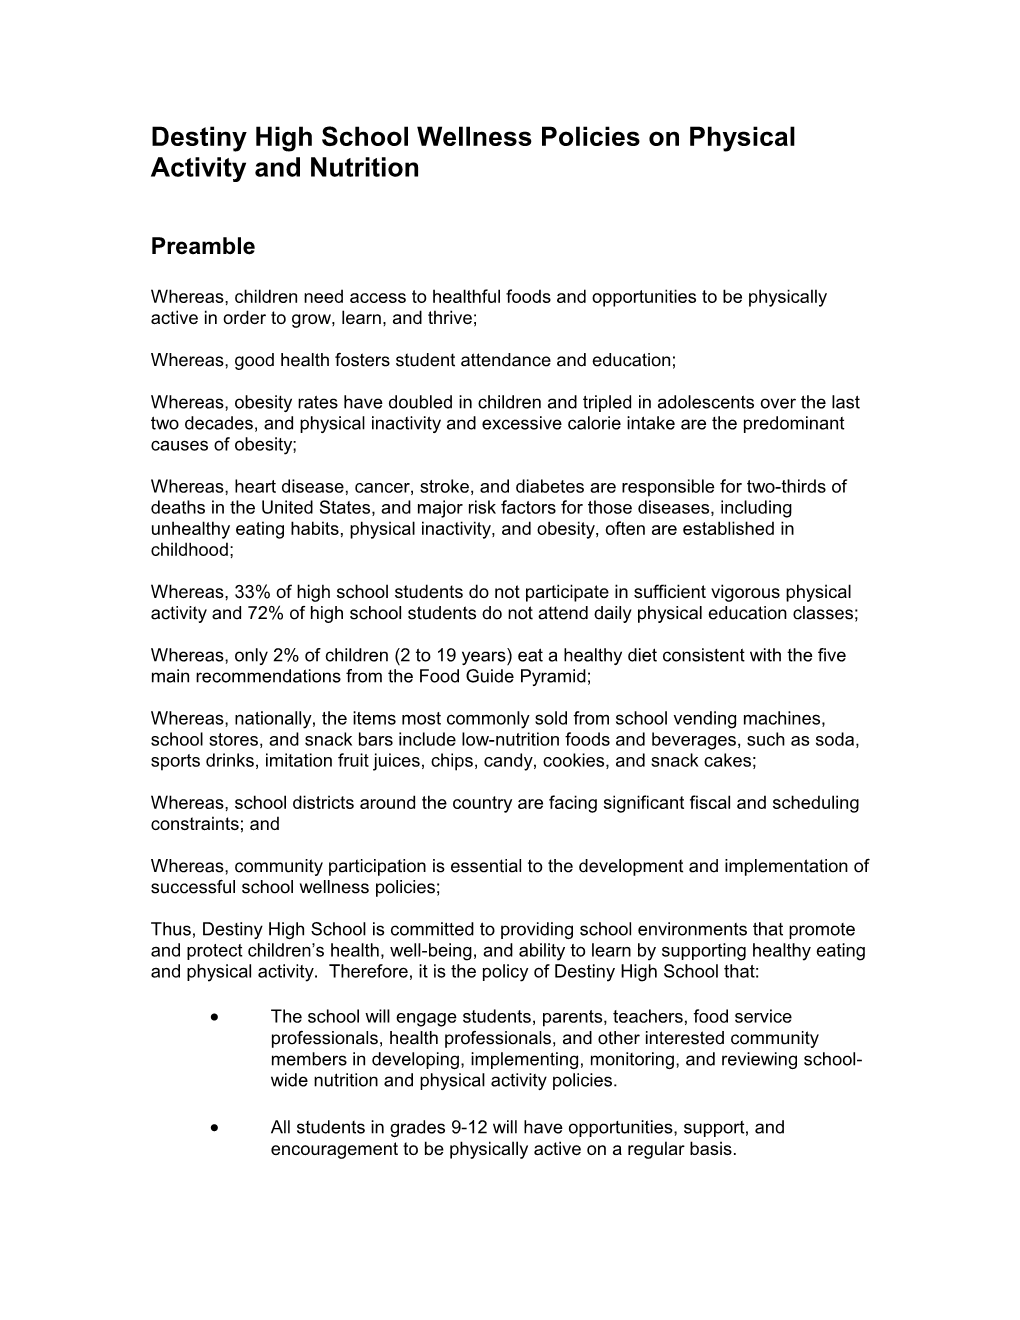 DLH Academy Wellness Policies on Physical Activity and Nutrition